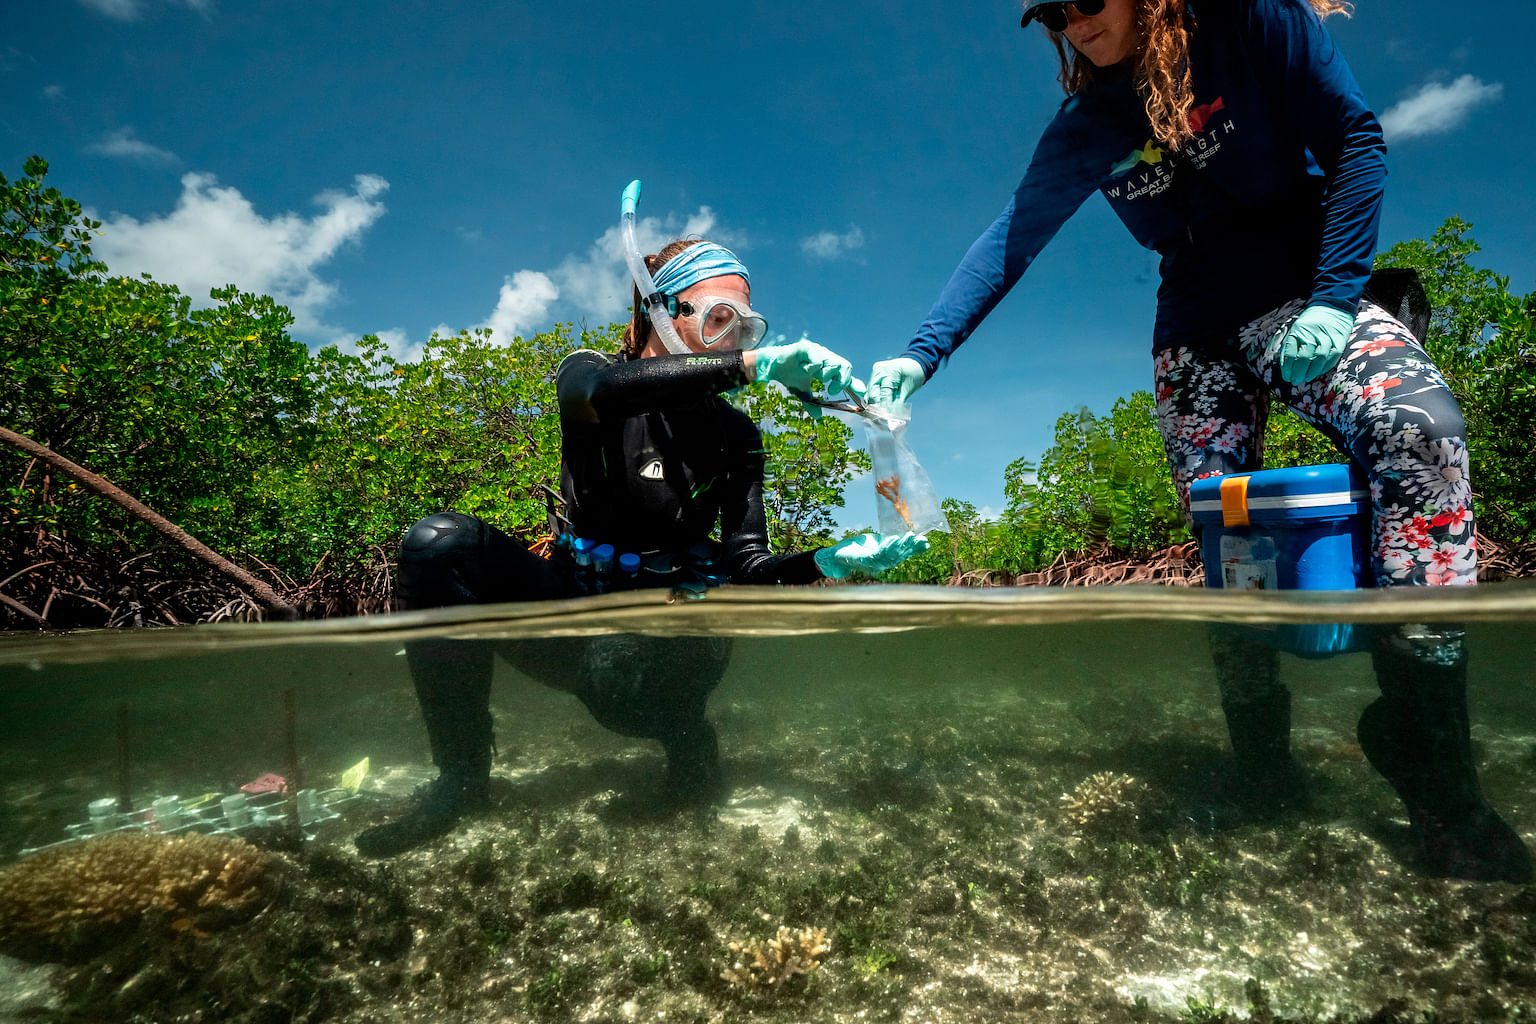 Dr Camp samples a freshly discovered coral colony for analysis in her lab. PHOTO: ROLEX/FRANCK GAZZOLA